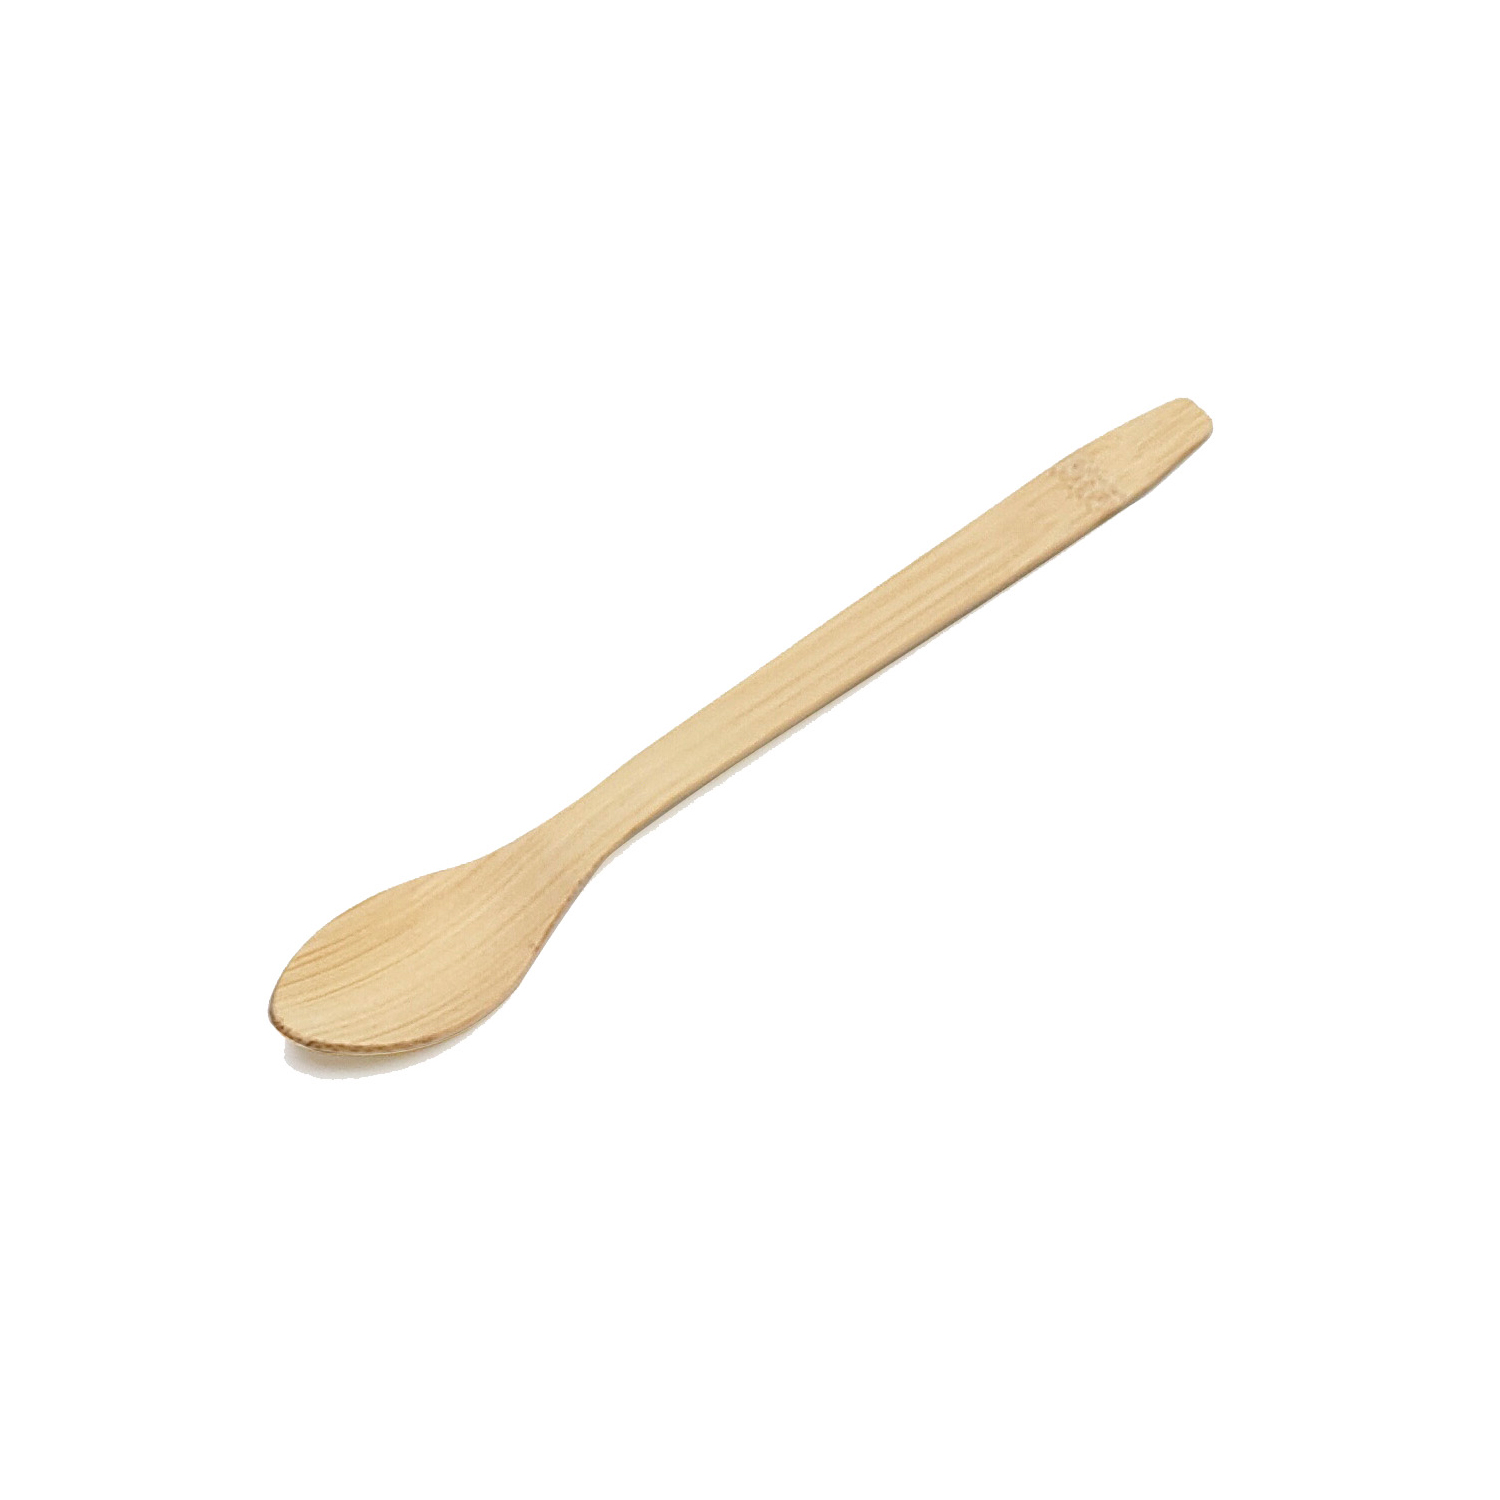 Sustainable and Biodegradable Bamboo Utensils for Easy Disposable Use